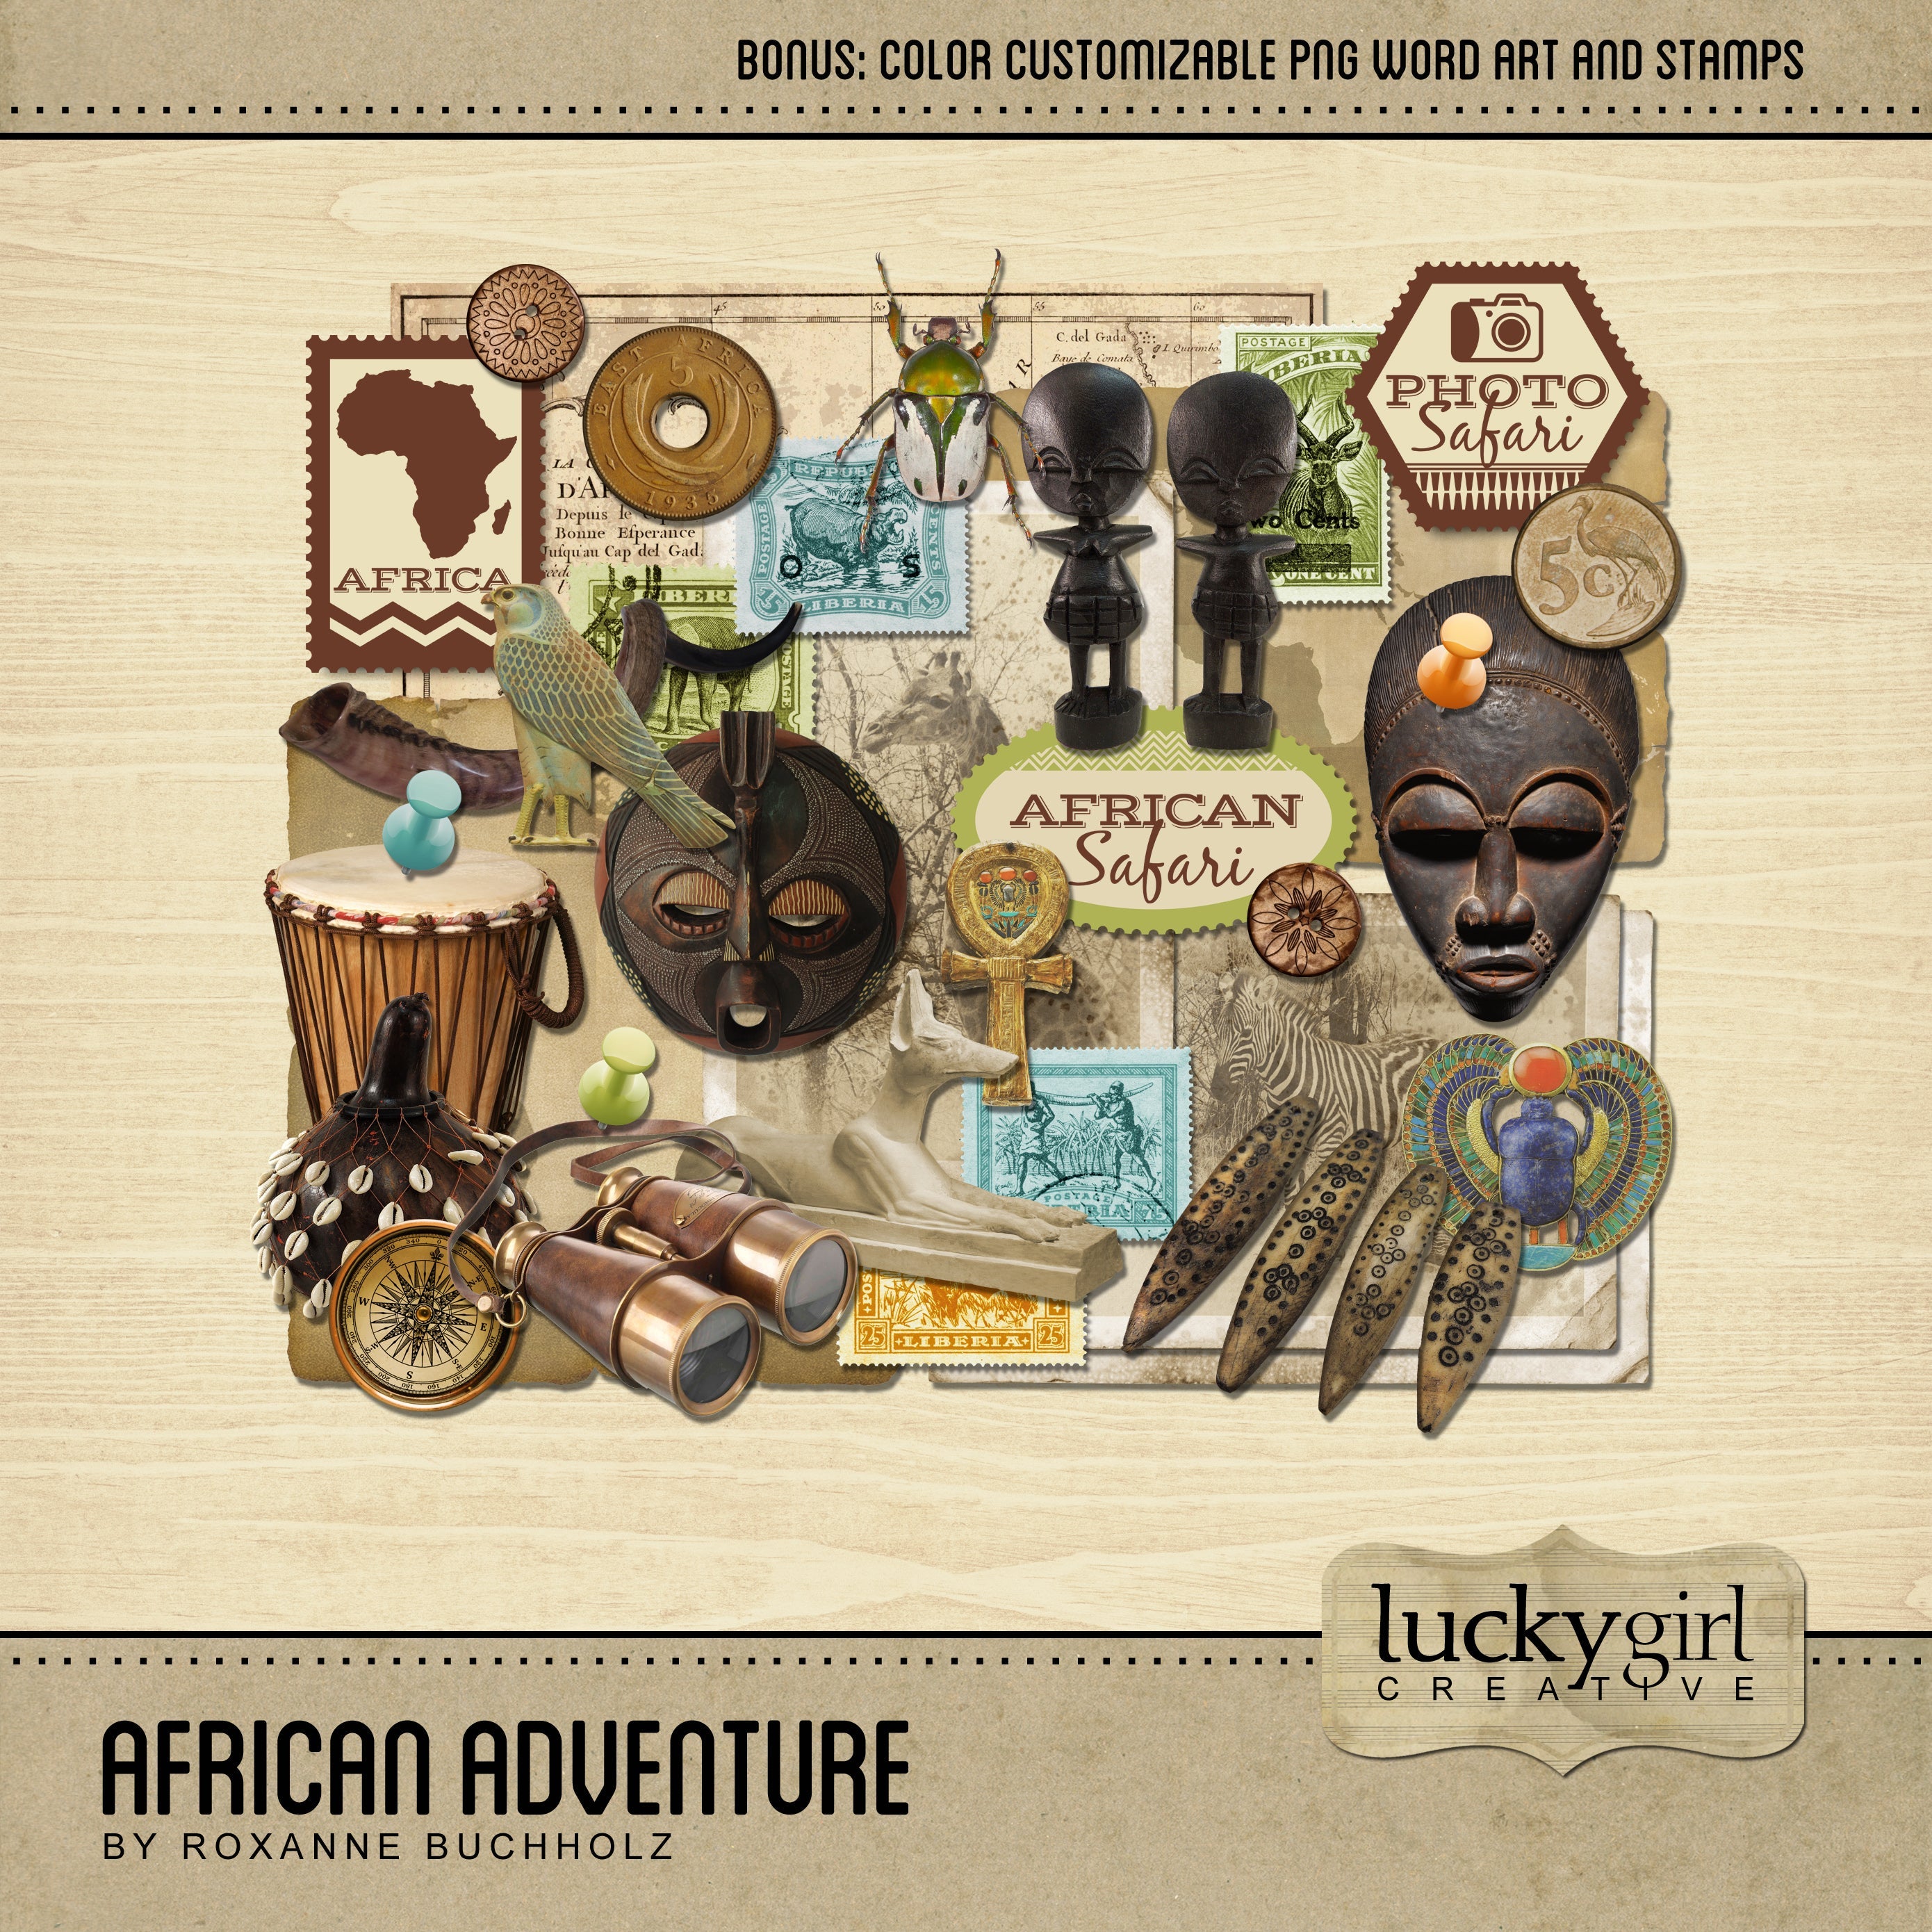 Africa digital scrapbook kits by Lucky Girl Creative offer a wide variety of realistic embellishments and digital paper. Great for safari vacations and mission trips to Africa, these kits are filled with authentic tribal artifacts and animals.